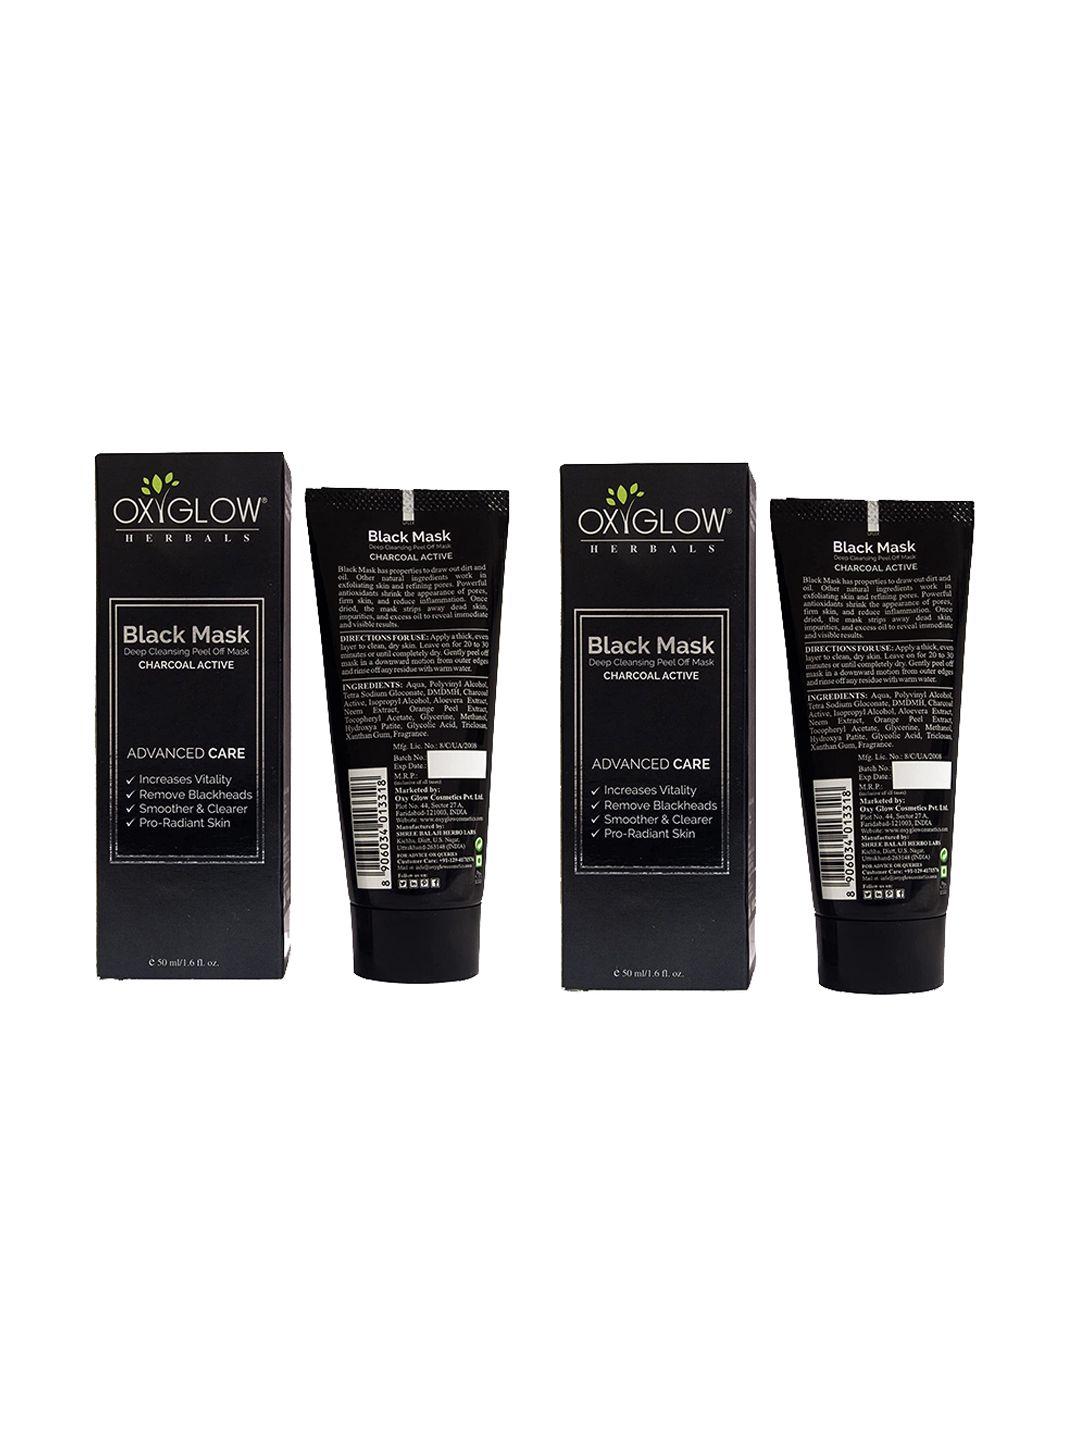 oxyglow set of 2 black mask deep cleansing peel-off mask with charcoal active - 50ml each